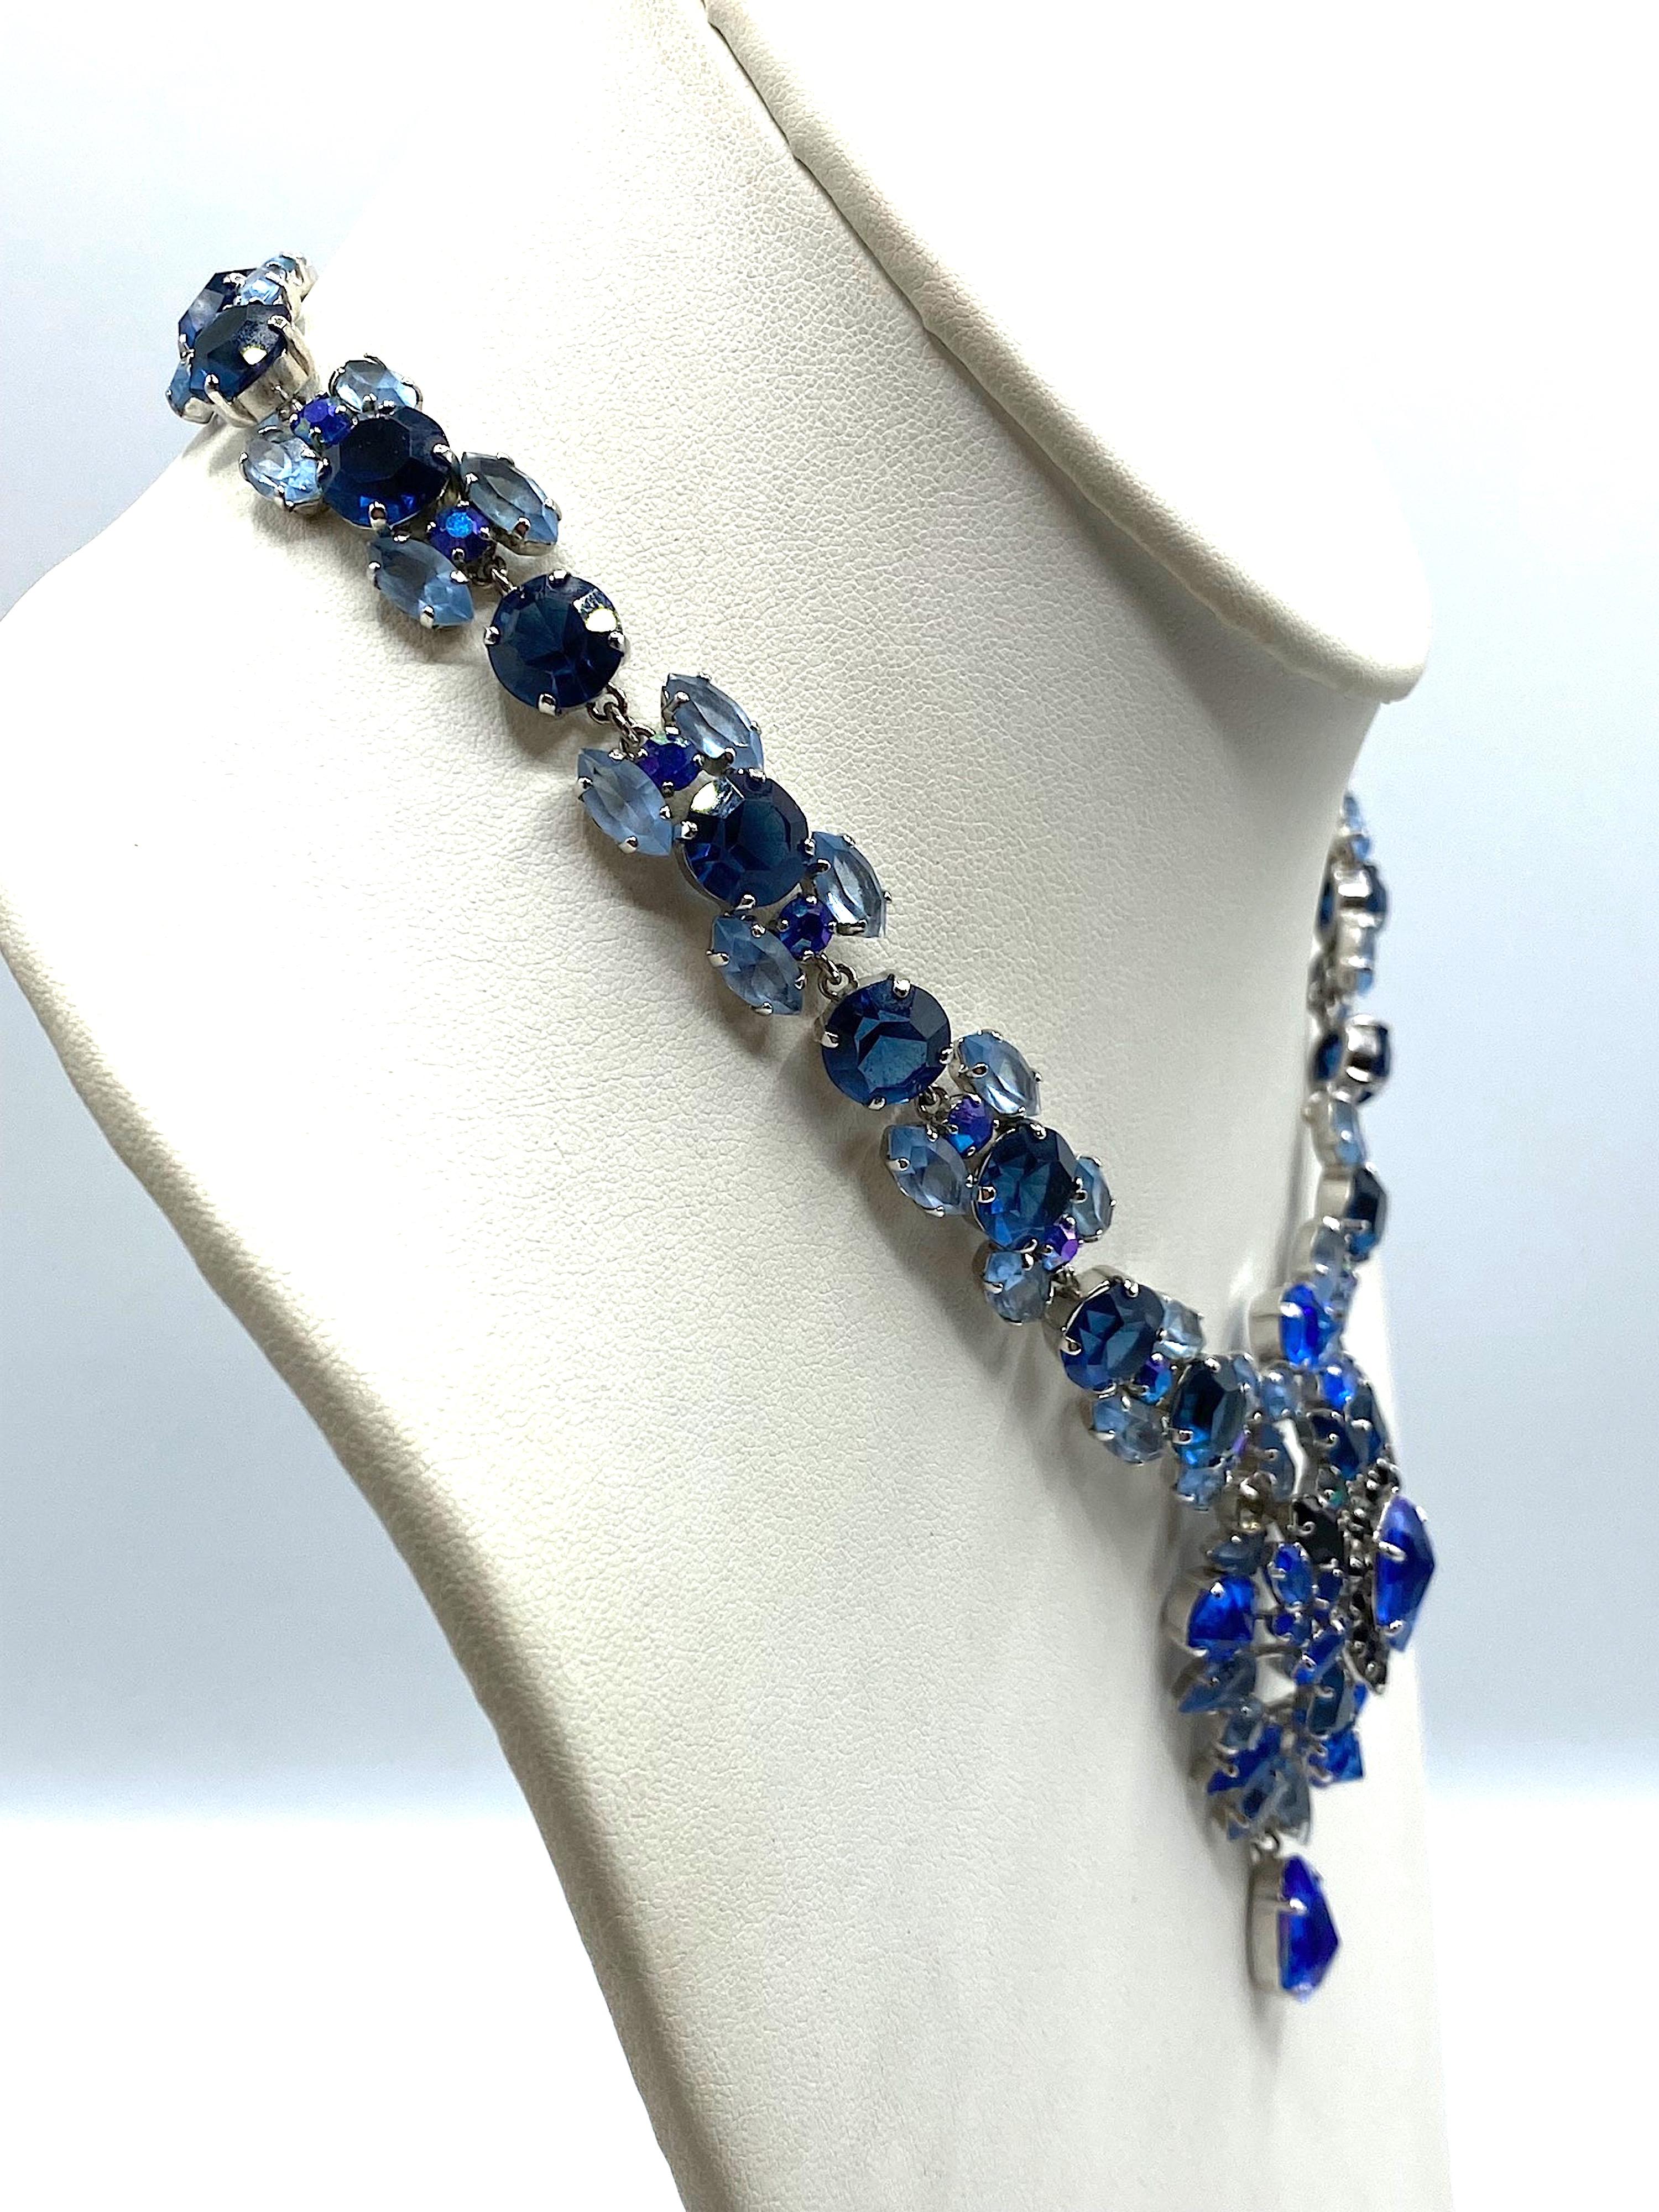 Christian Dior 1959 Shades of Blue Rhinestone Necklace by Henkel & Grosse' 7